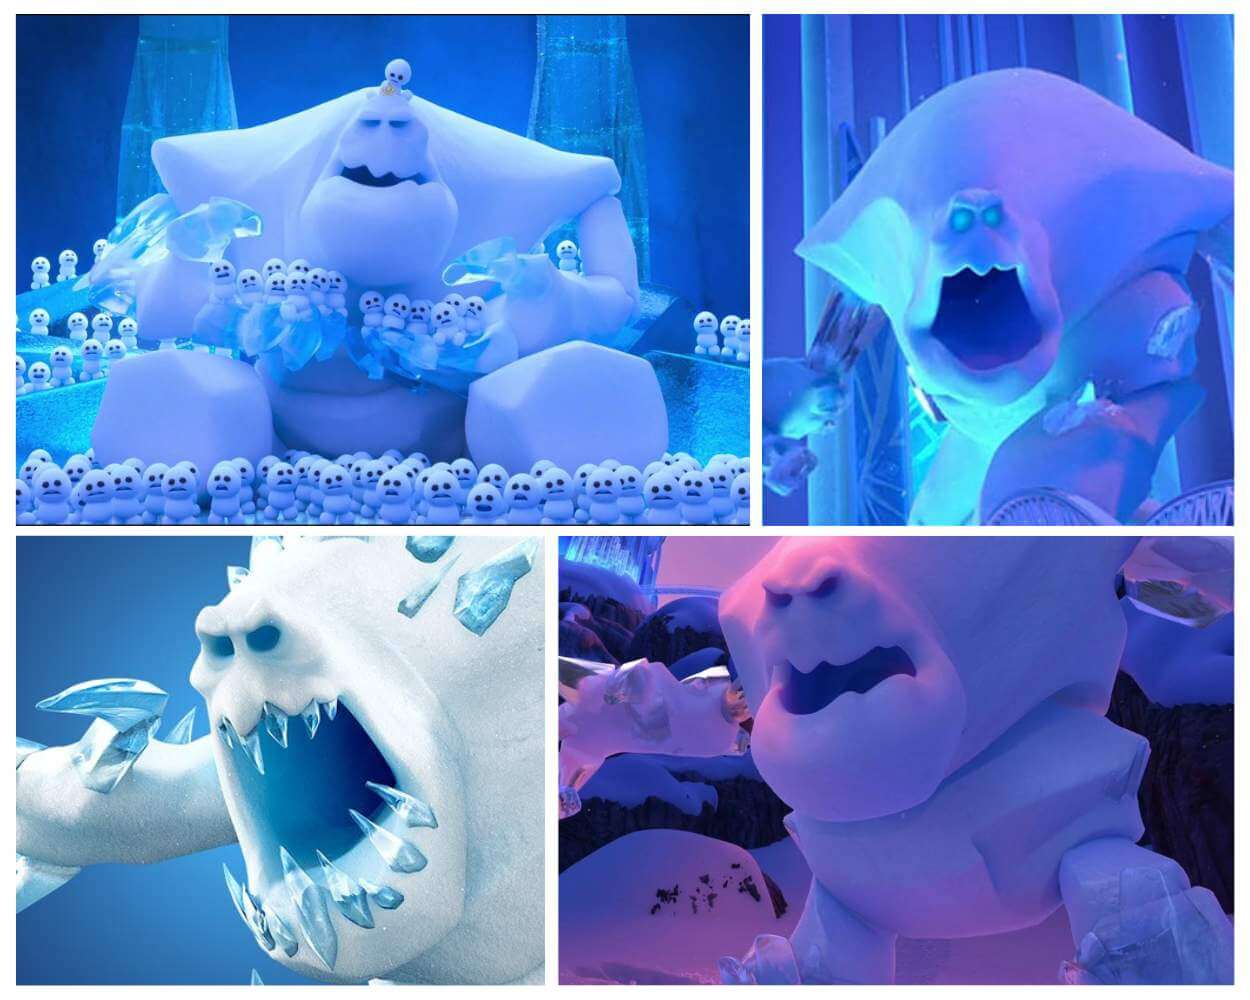 Marshmallow - Characters In Frozen